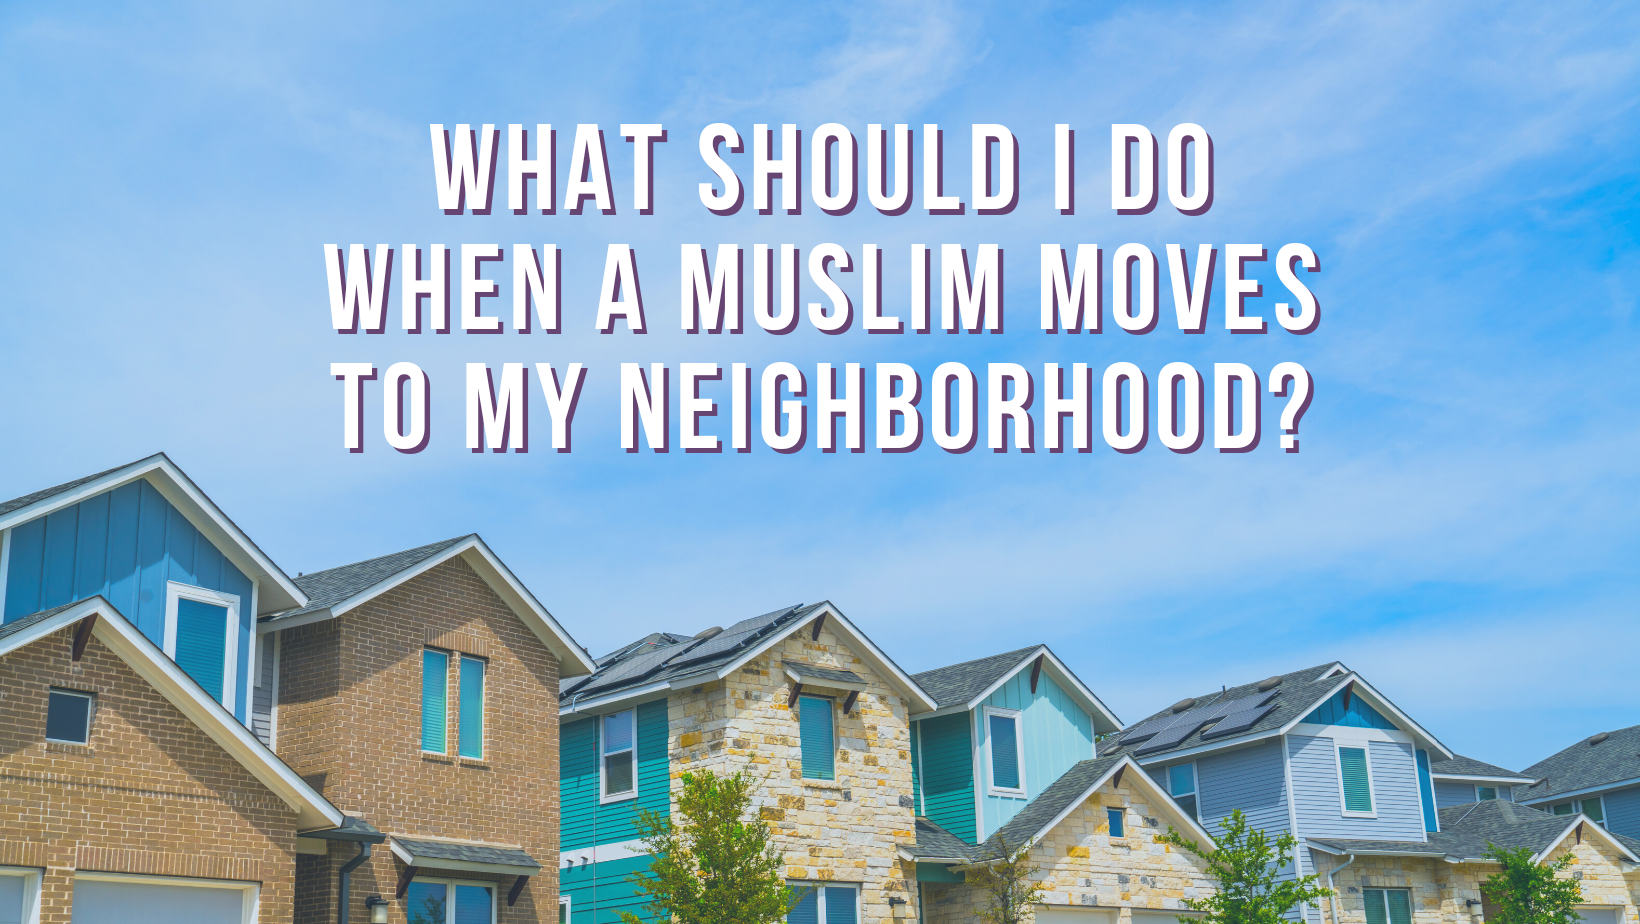 What should I do when a Muslim moves to my neighborhood?